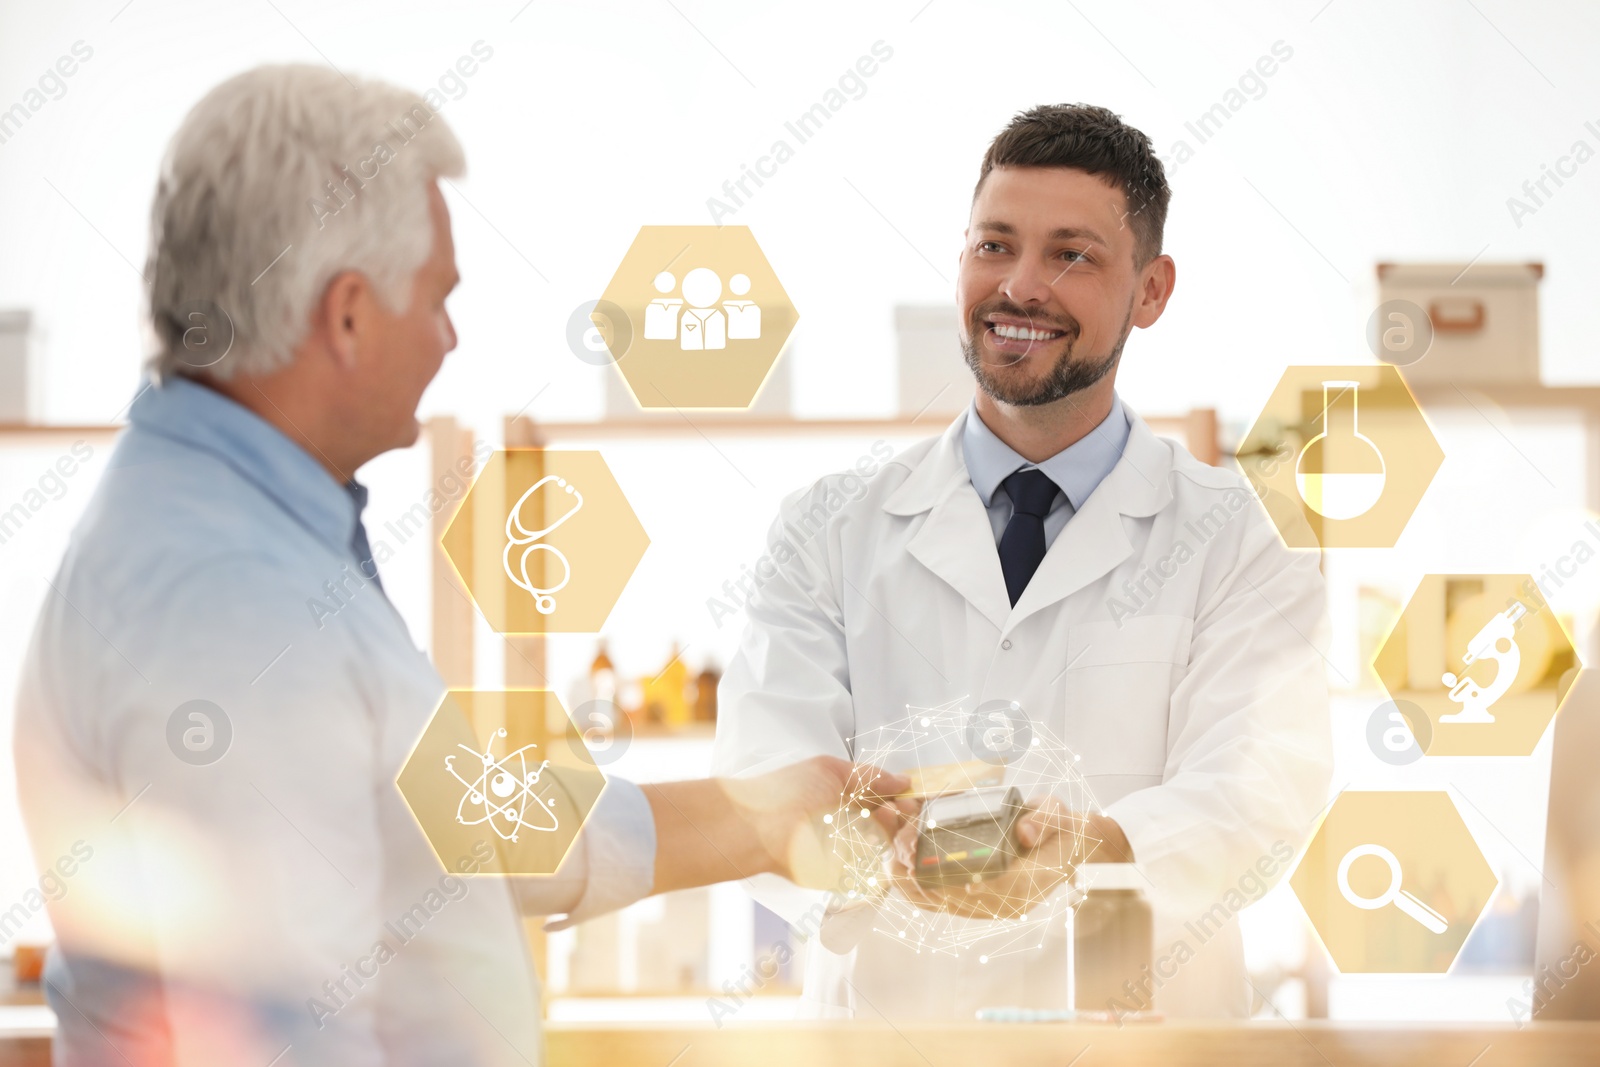 Image of Professional pharmacist working with customer in drugstore